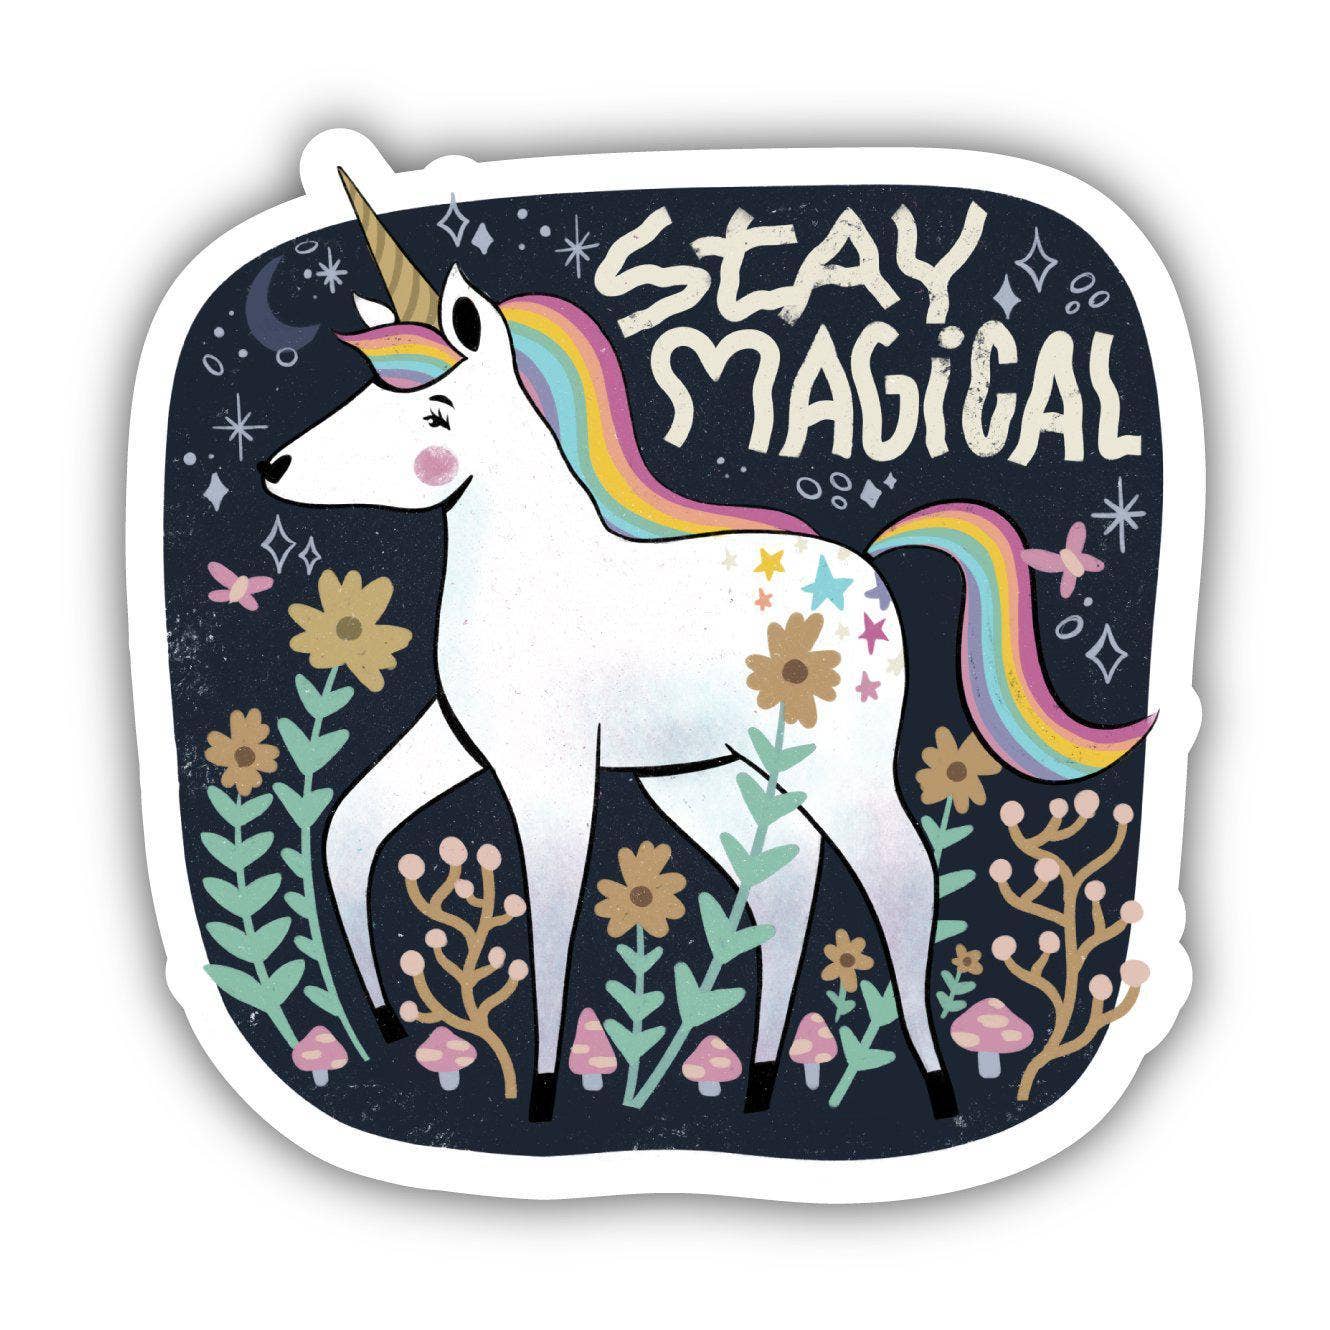 Stay Magical | Unicorn Fairytale Sticker - Spiral Circle